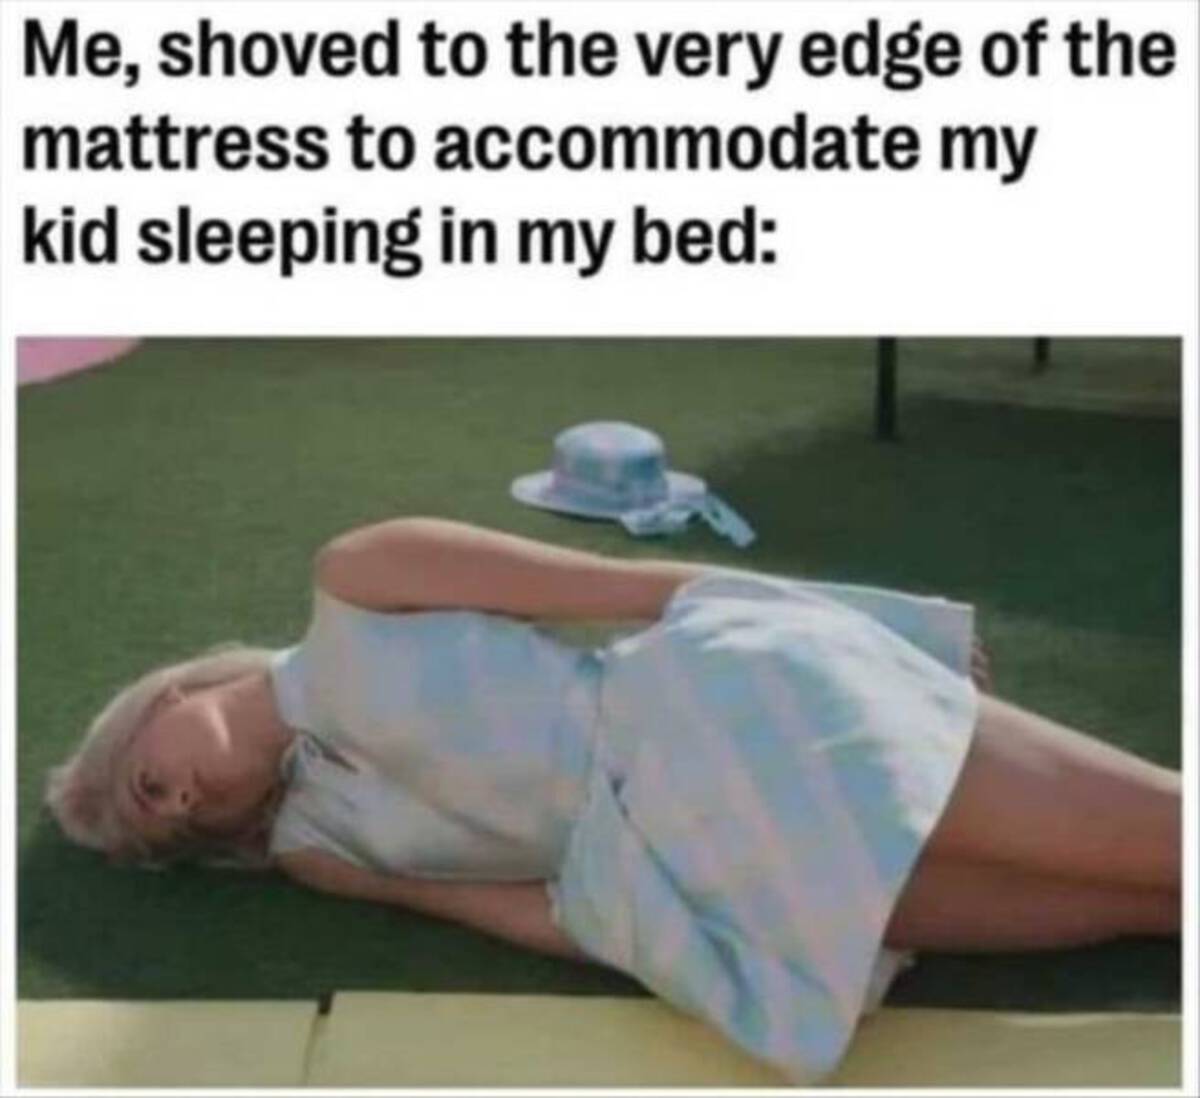 barbie laying down meme - Me, shoved to the very edge of the mattress to accommodate my kid sleeping in my bed